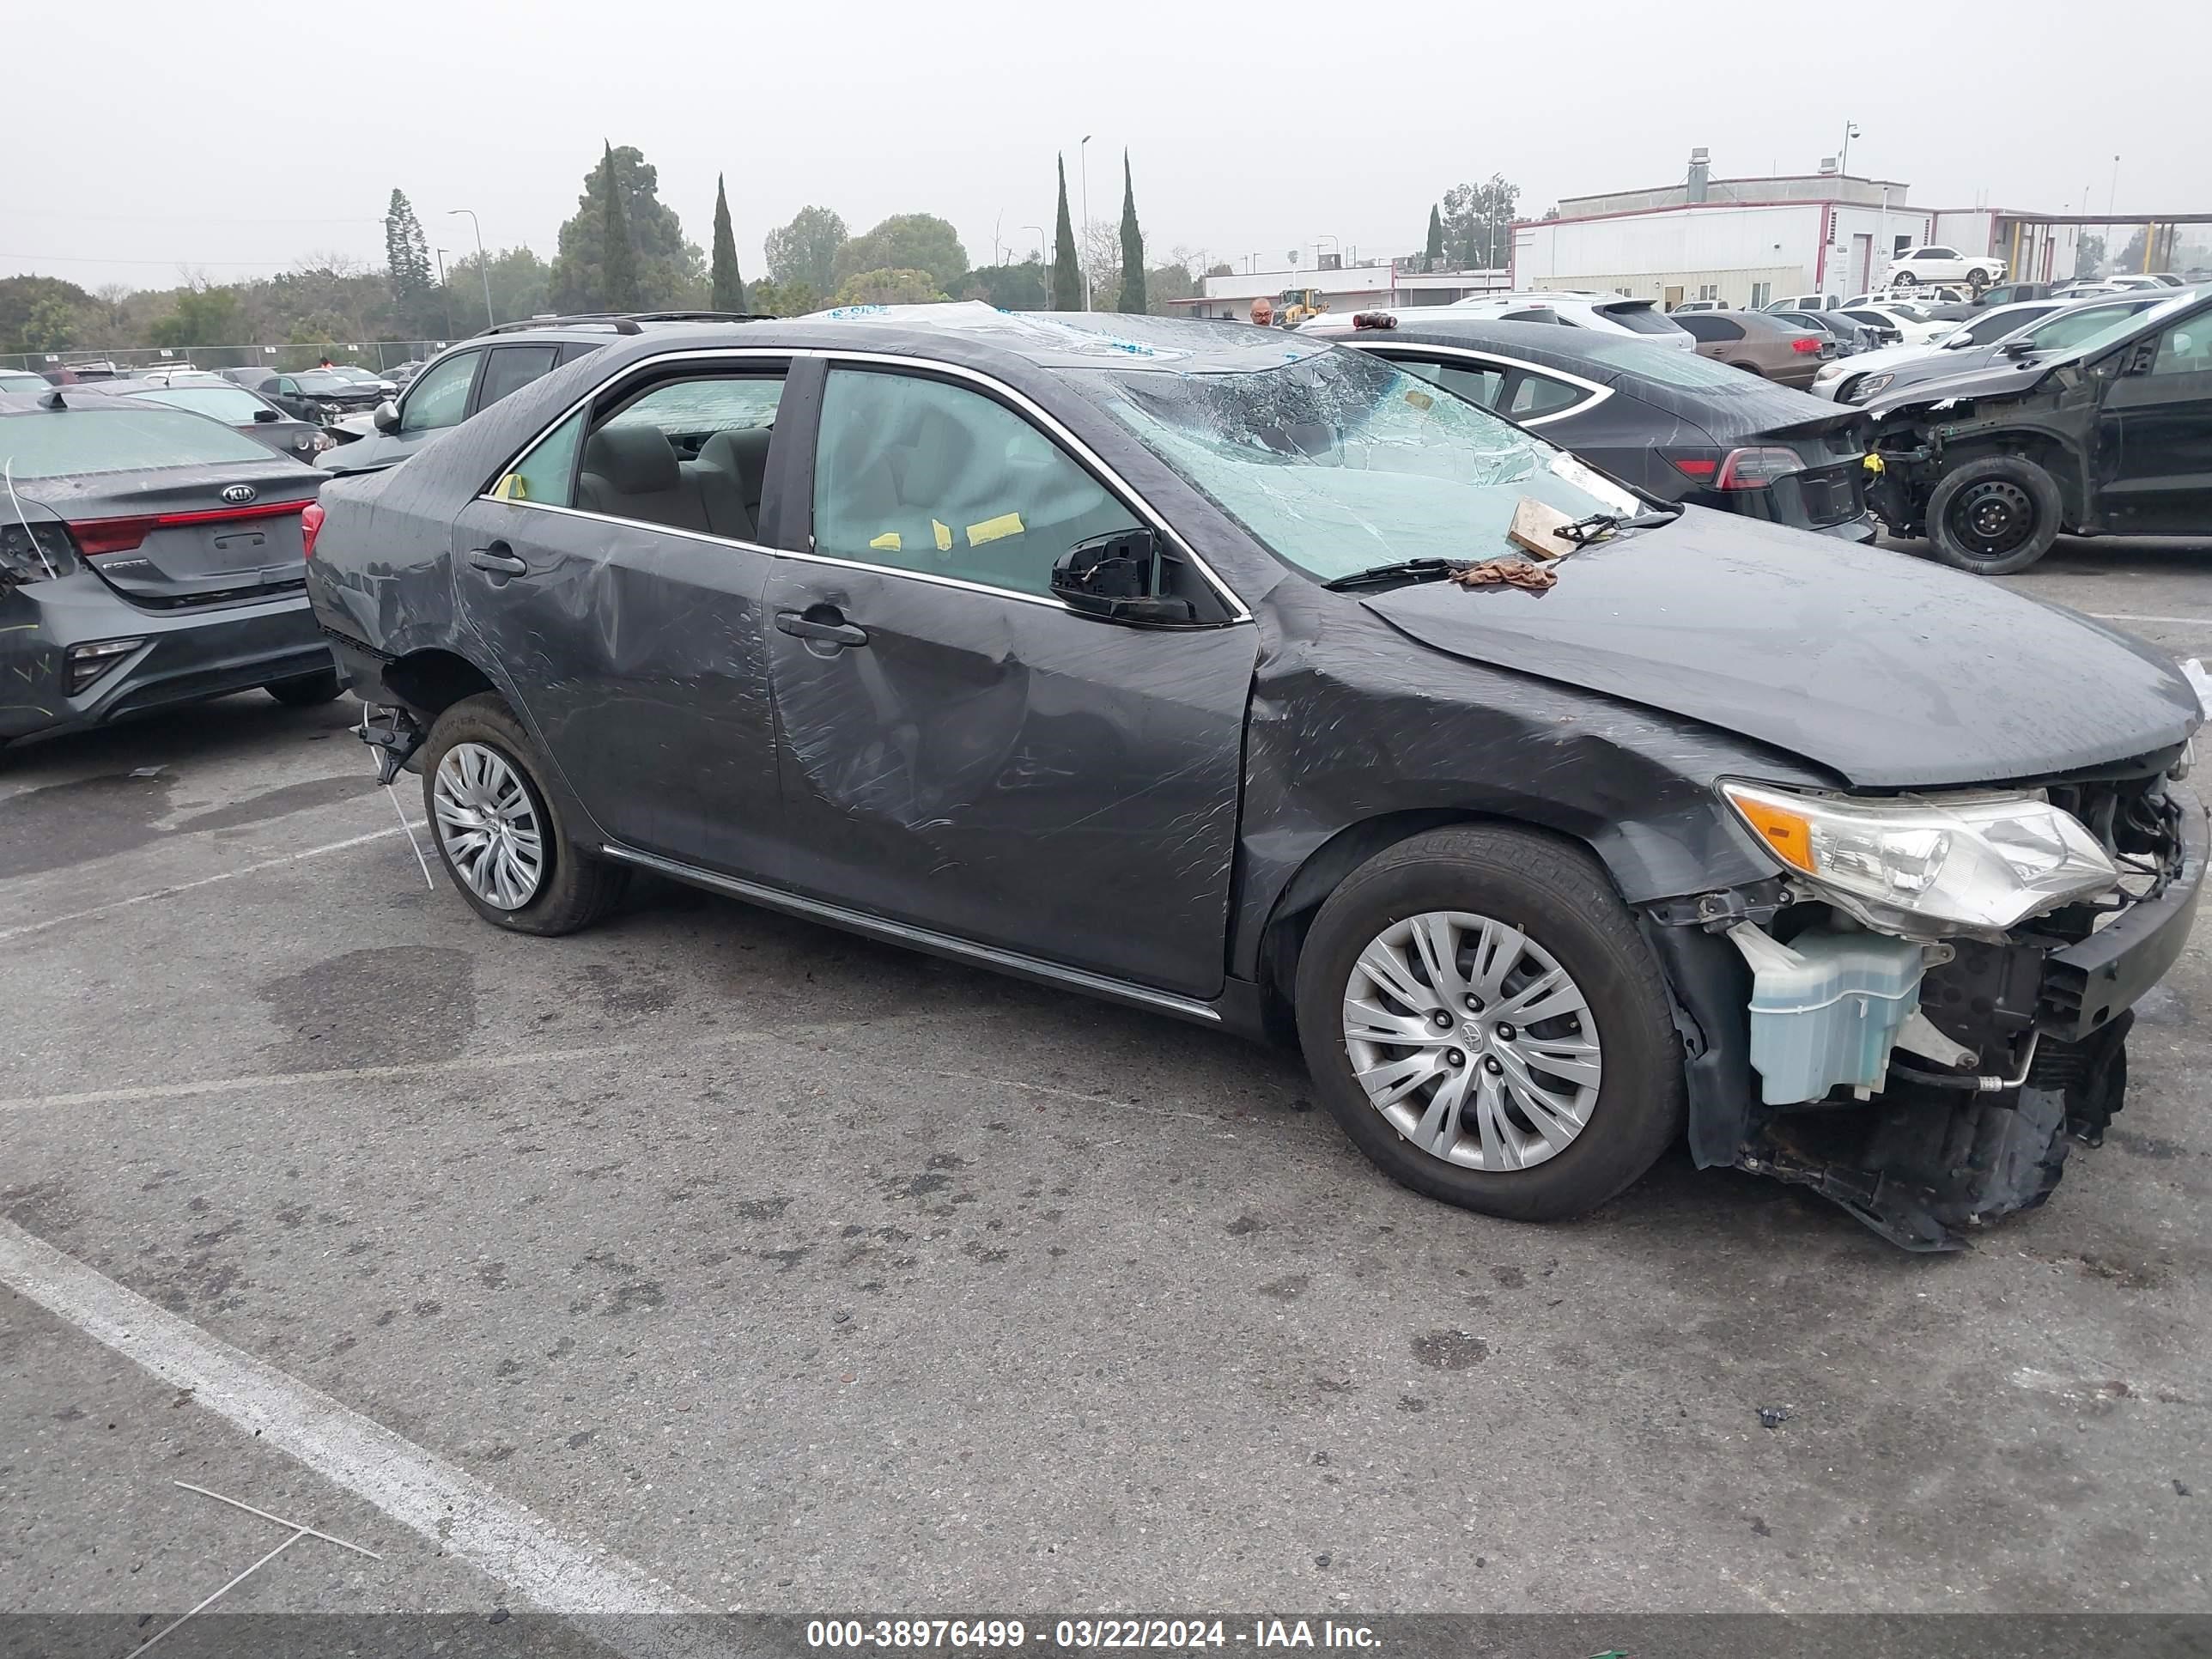 vin: 4T4BF1FK9CR273474 4T4BF1FK9CR273474 2012 toyota camry 2500 for Sale in 90248, 18300 South Vermont Avenue, Gardena, California, USA